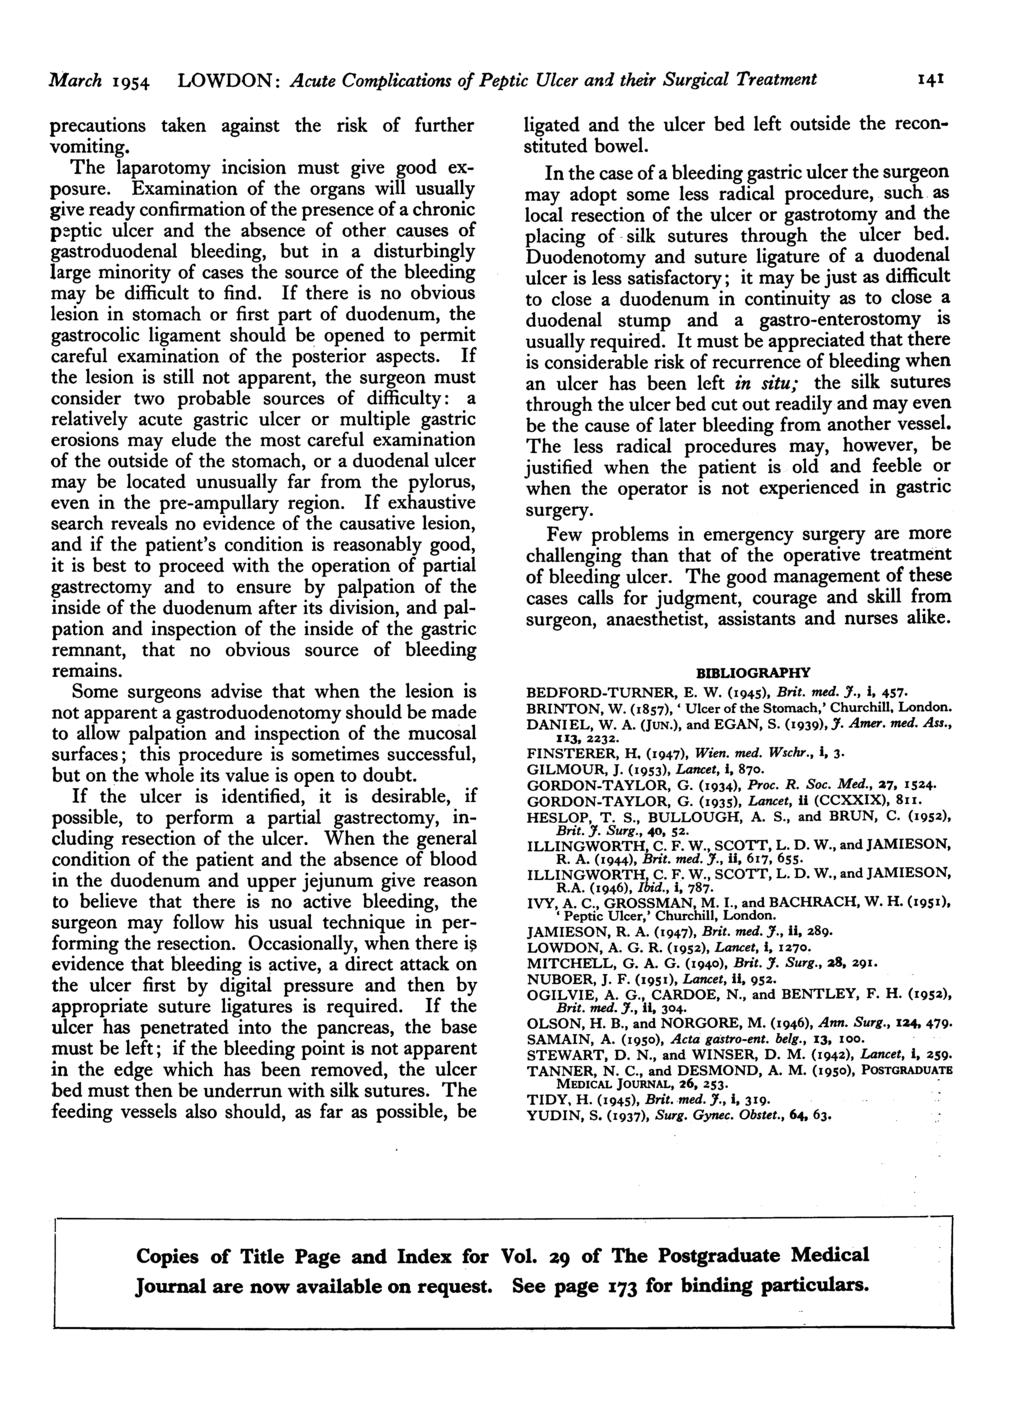 March 1954 LOWDON: Acute Complications of Peptic Ulcer and their Surgical Treatment I41 precautions taken against the risk of further vomiting. The laparotomy incision must give good exposure.